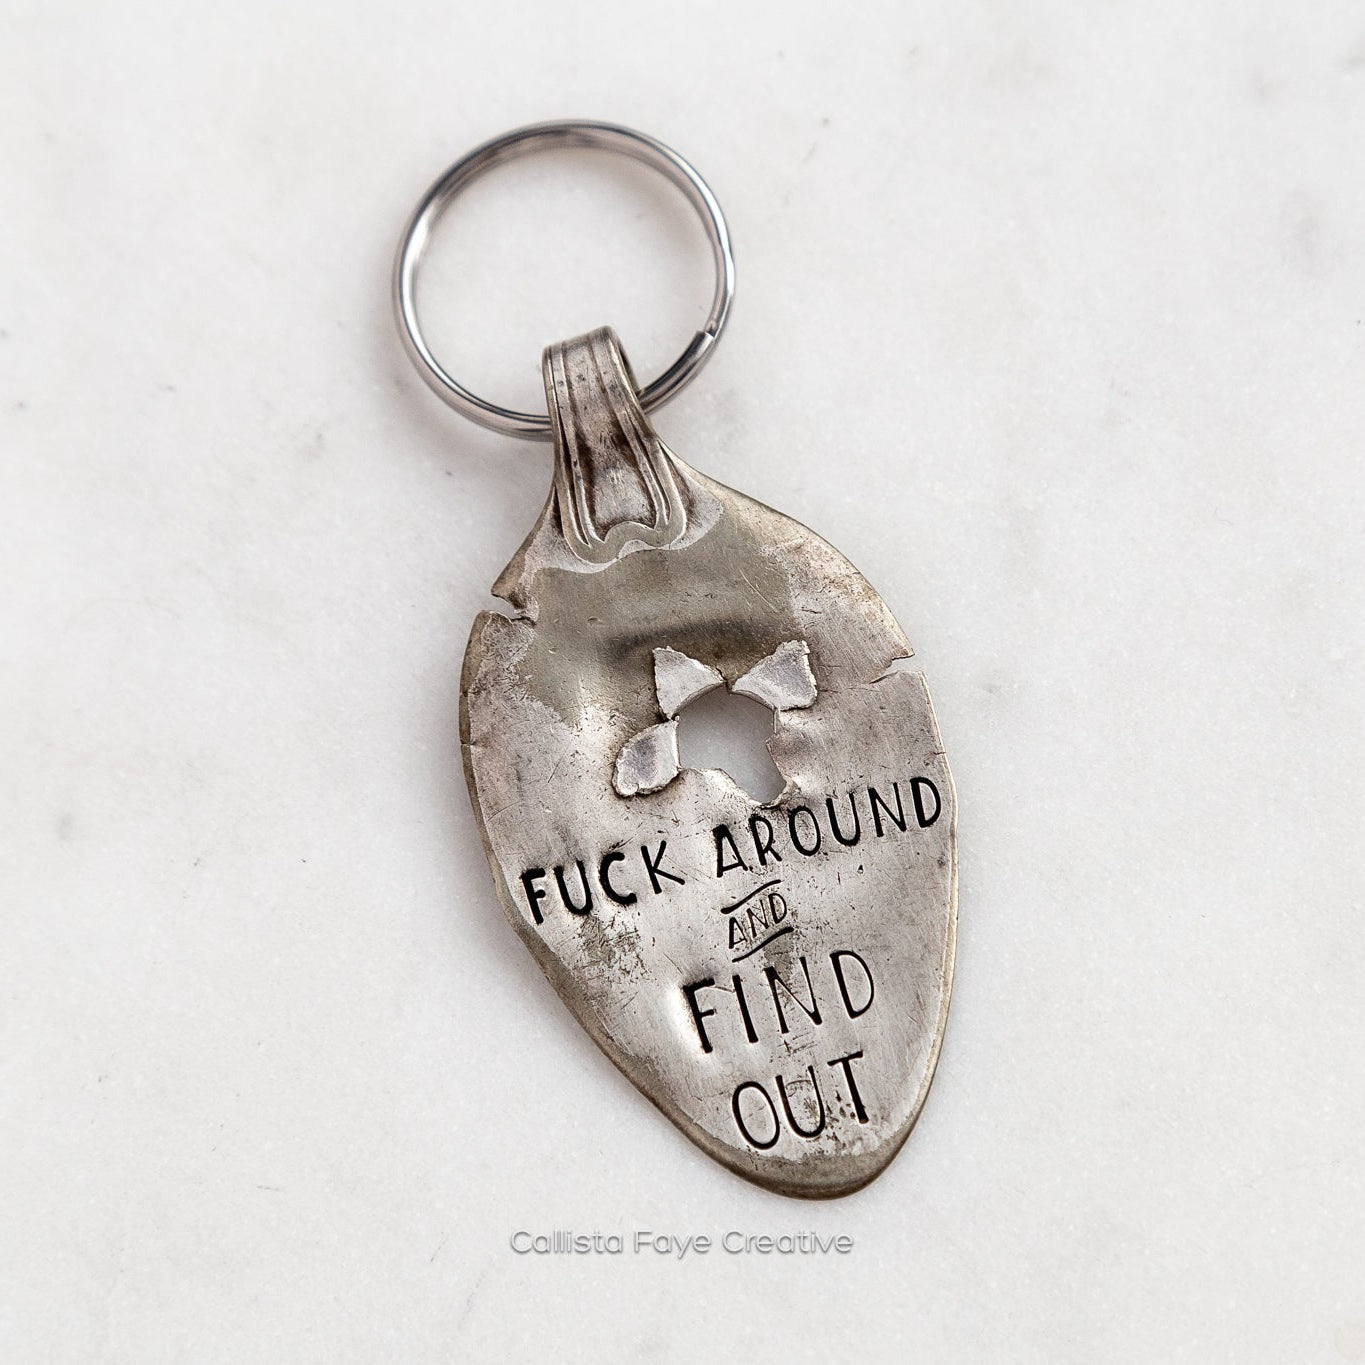 Fuck Around and Find Out, Bullet Hole, Hand Stamped Vintage Spoon Keychain Keychains callistafaye   